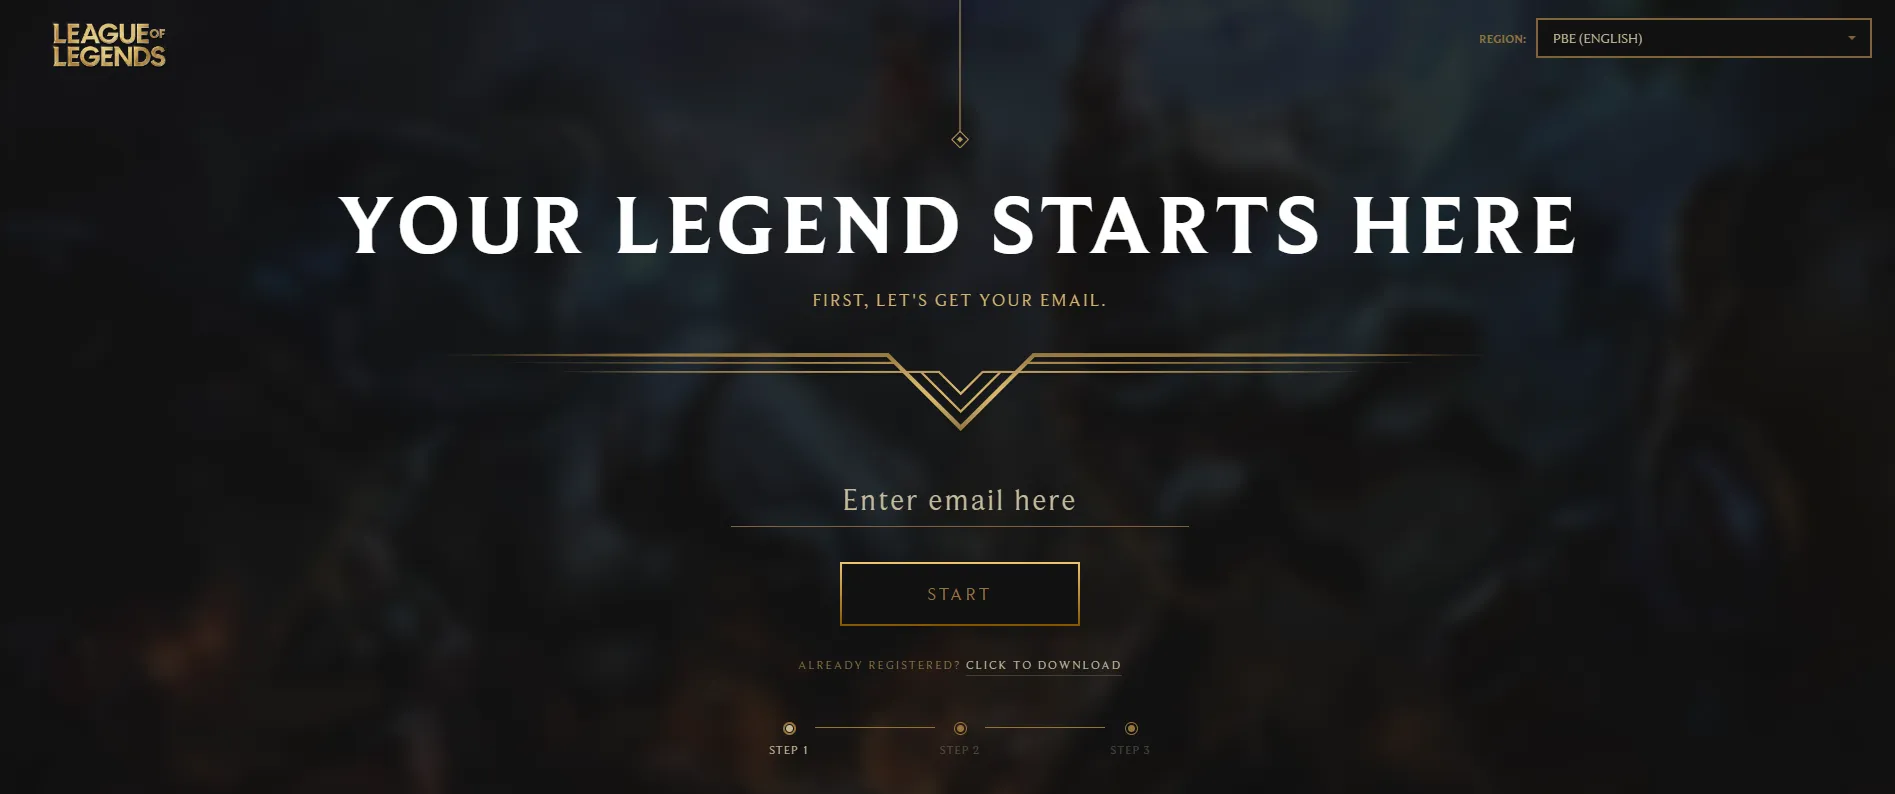 How to Create a League of Legends PBE Account